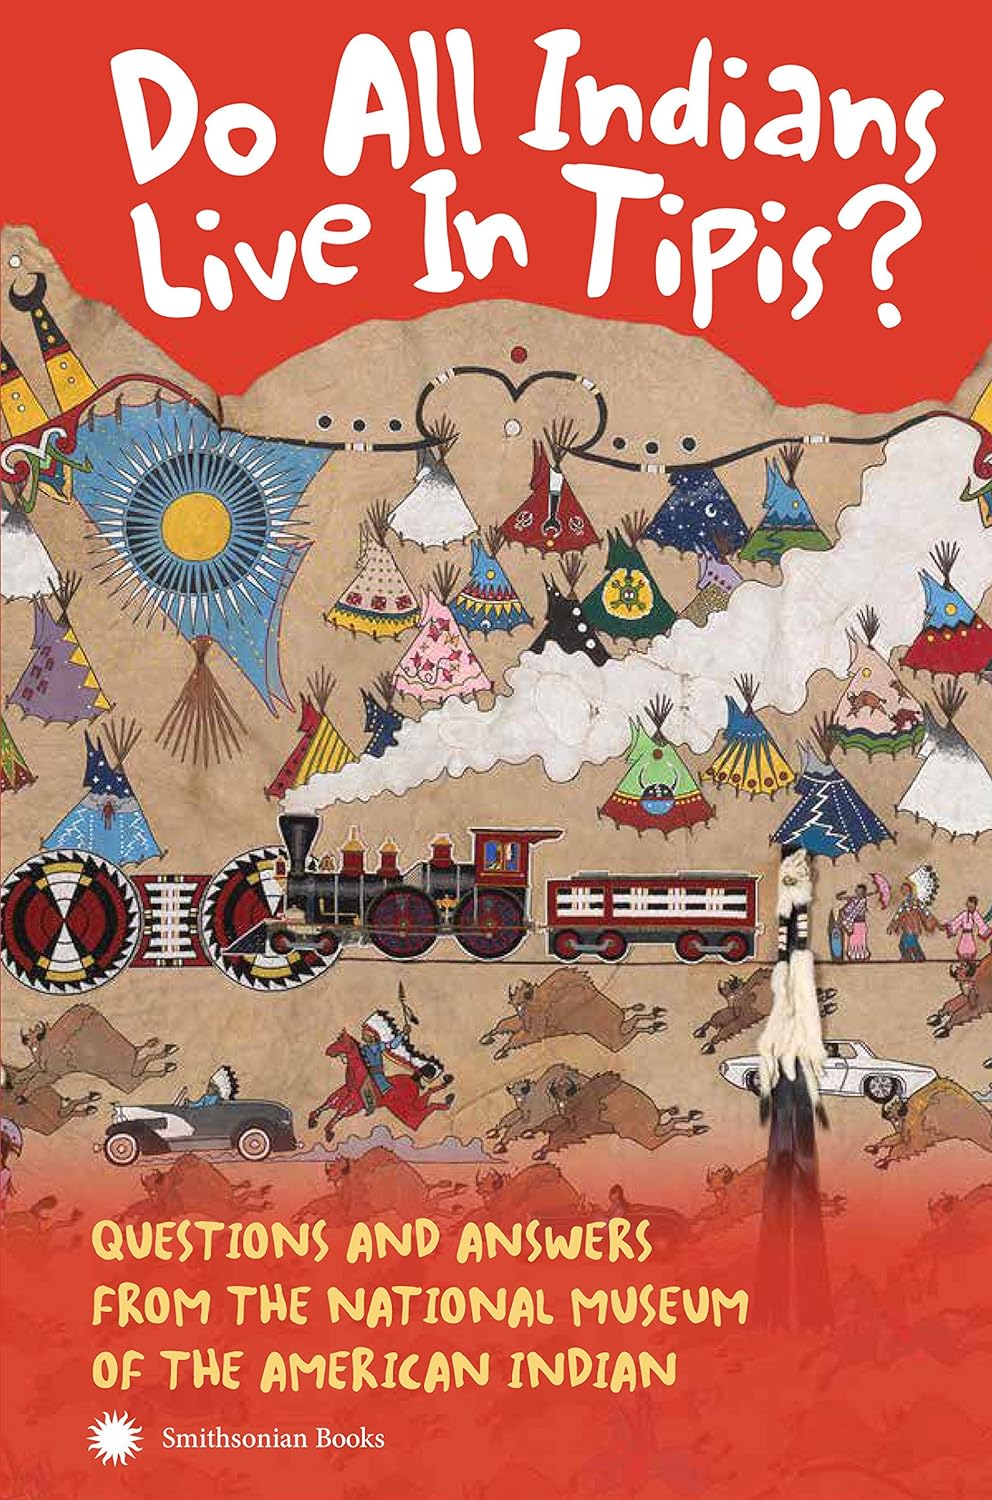 Image for "Do All Indians Live in Tipis? Second Edition"